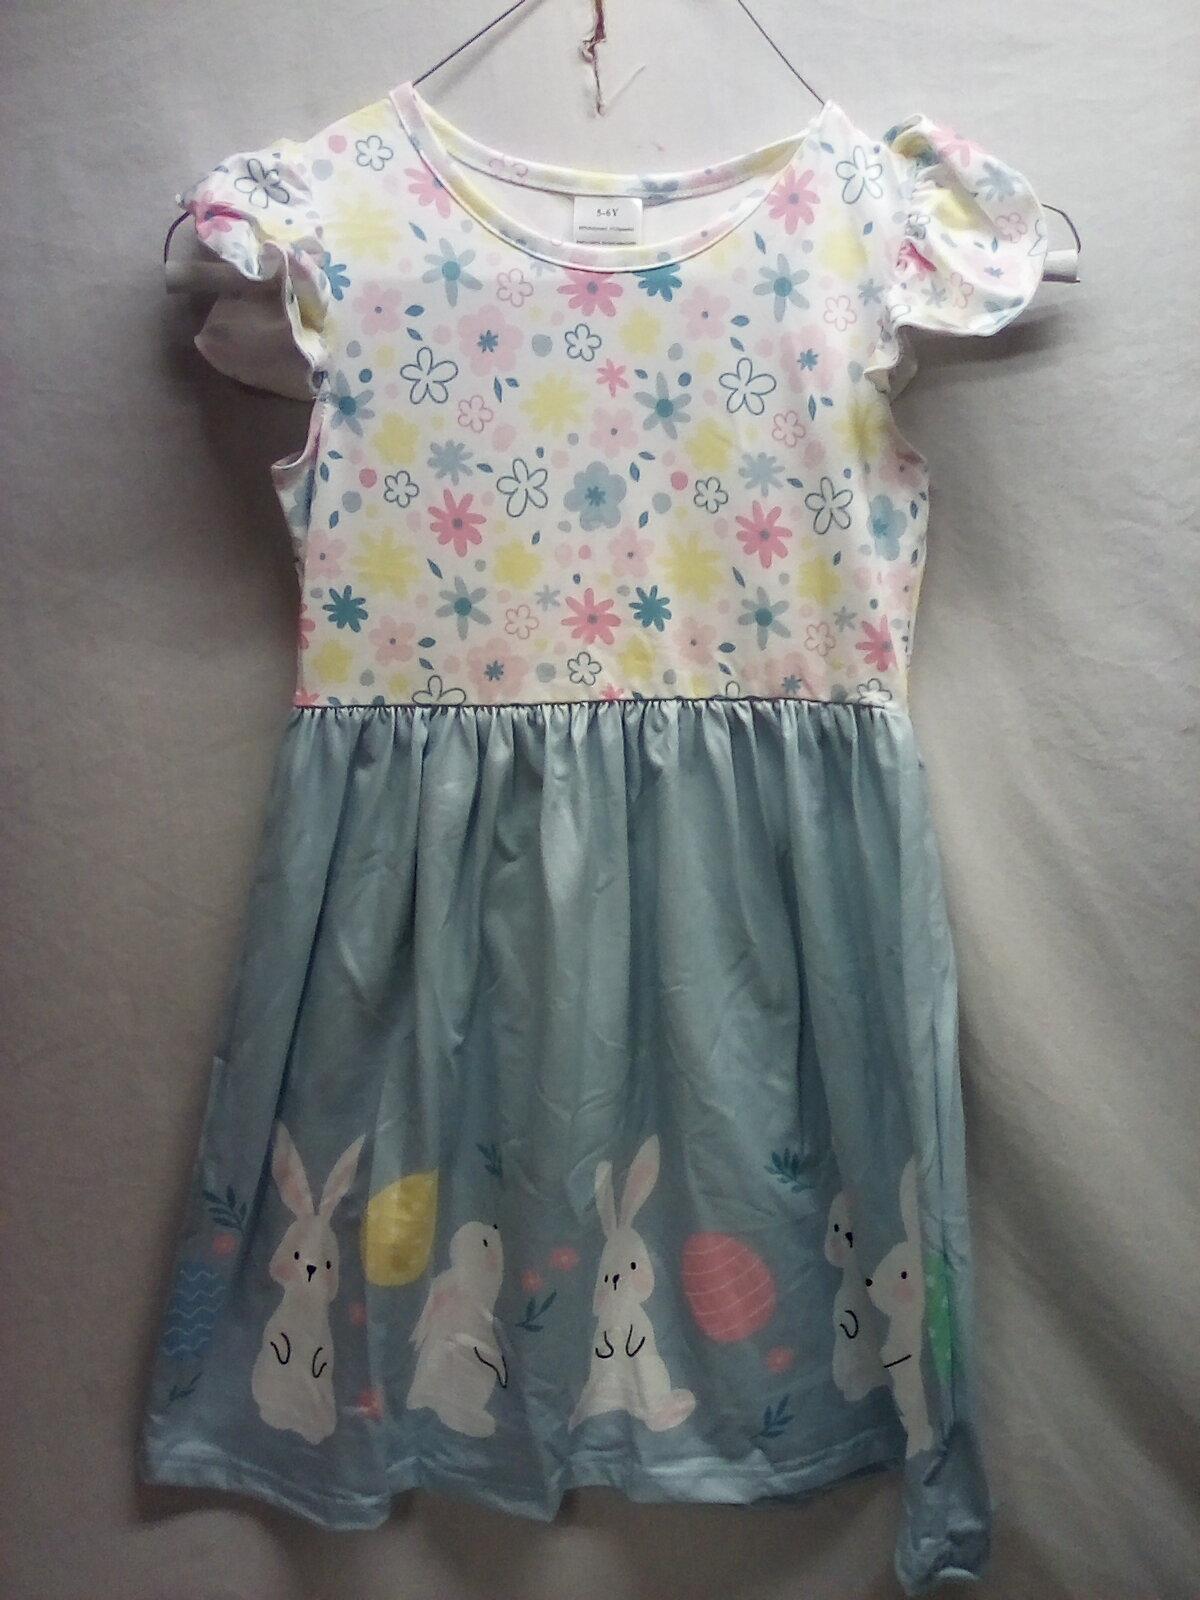 QTY 1 Pastel colored Bunny Dress, size 5-6y